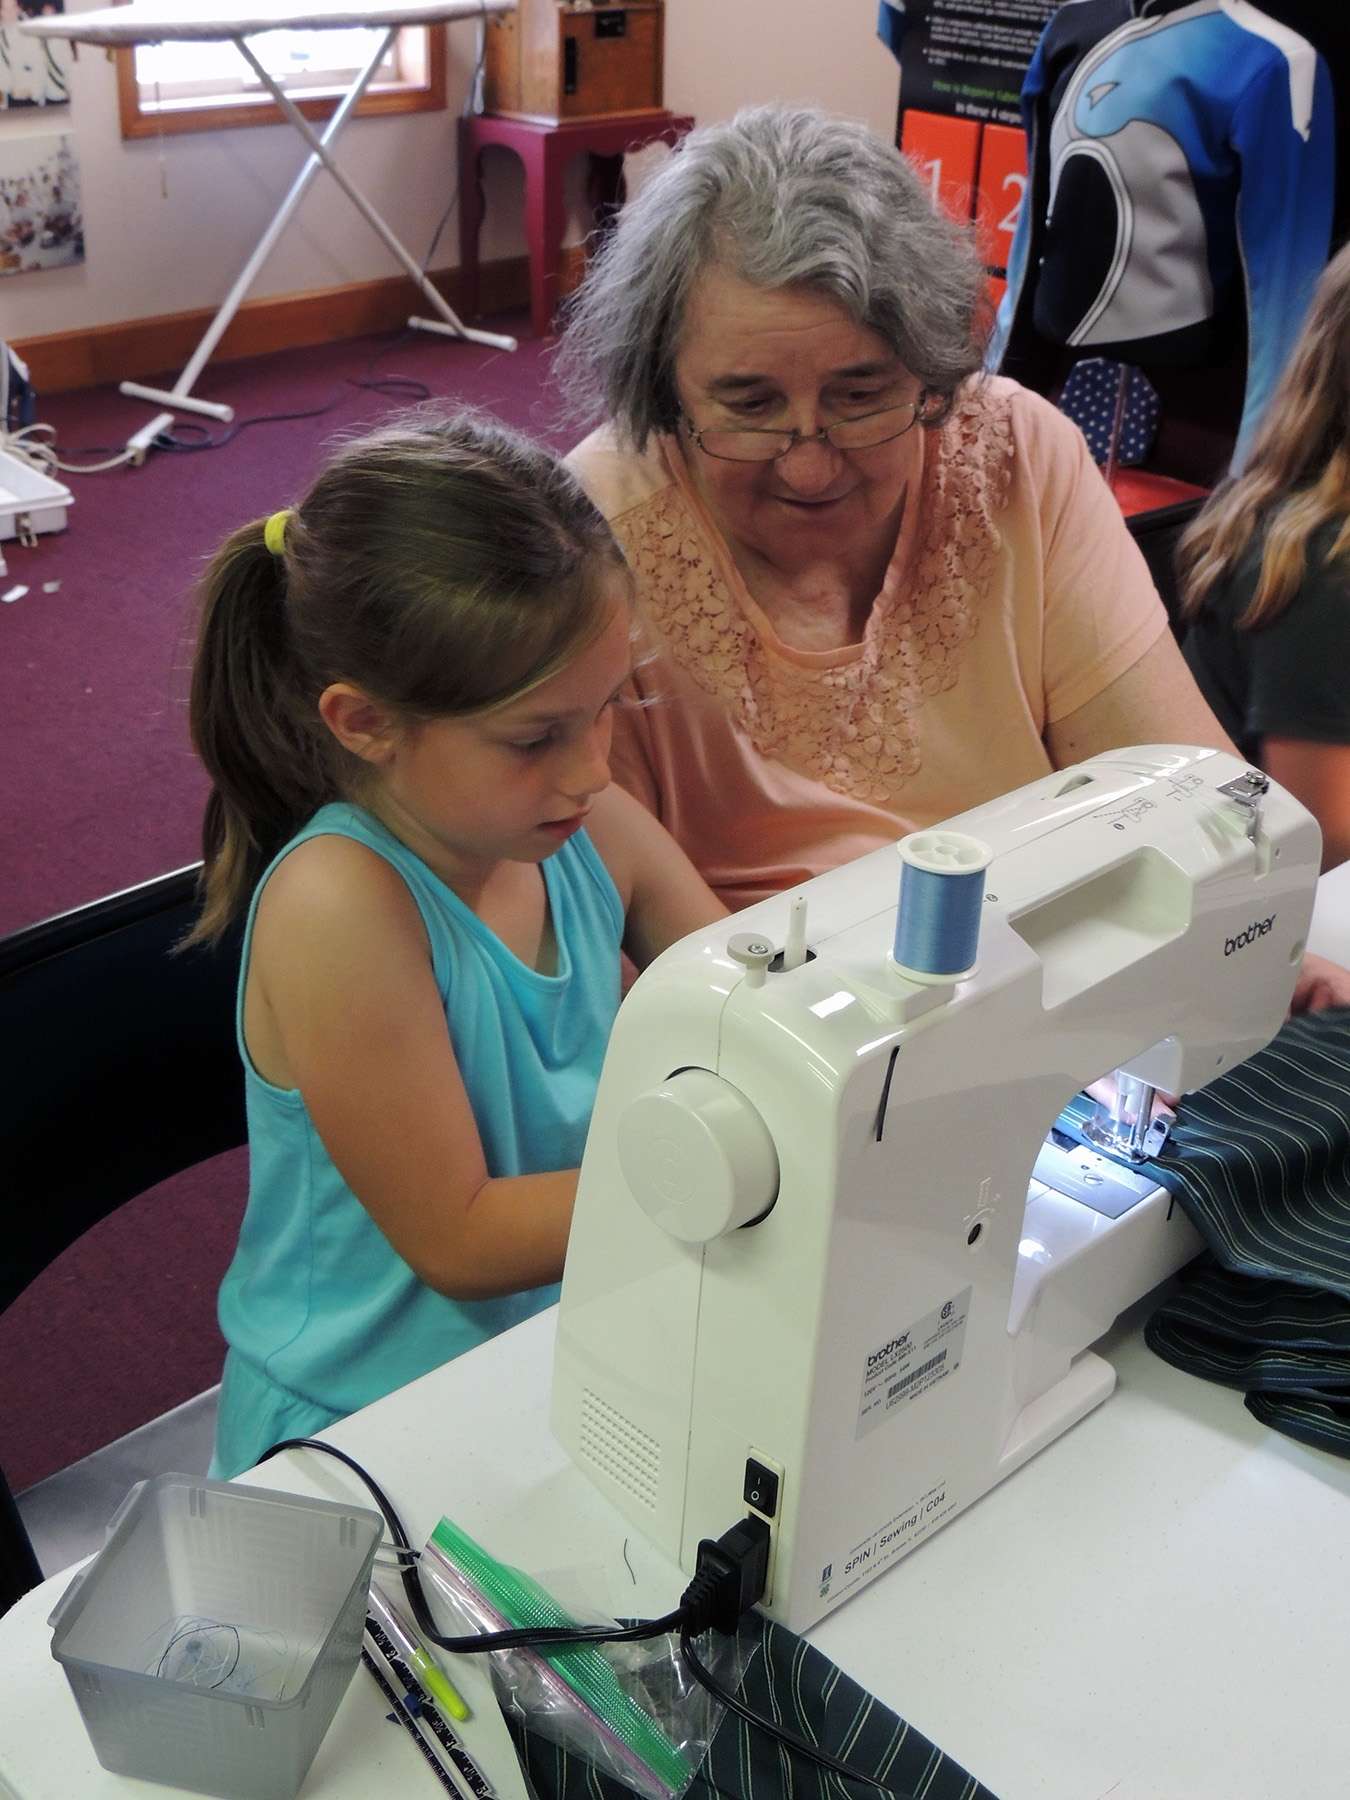 Carol Steinkamp works with one of the girls who attended the 4-H Sewing Workshop hosted by the DeMoulin Museum.